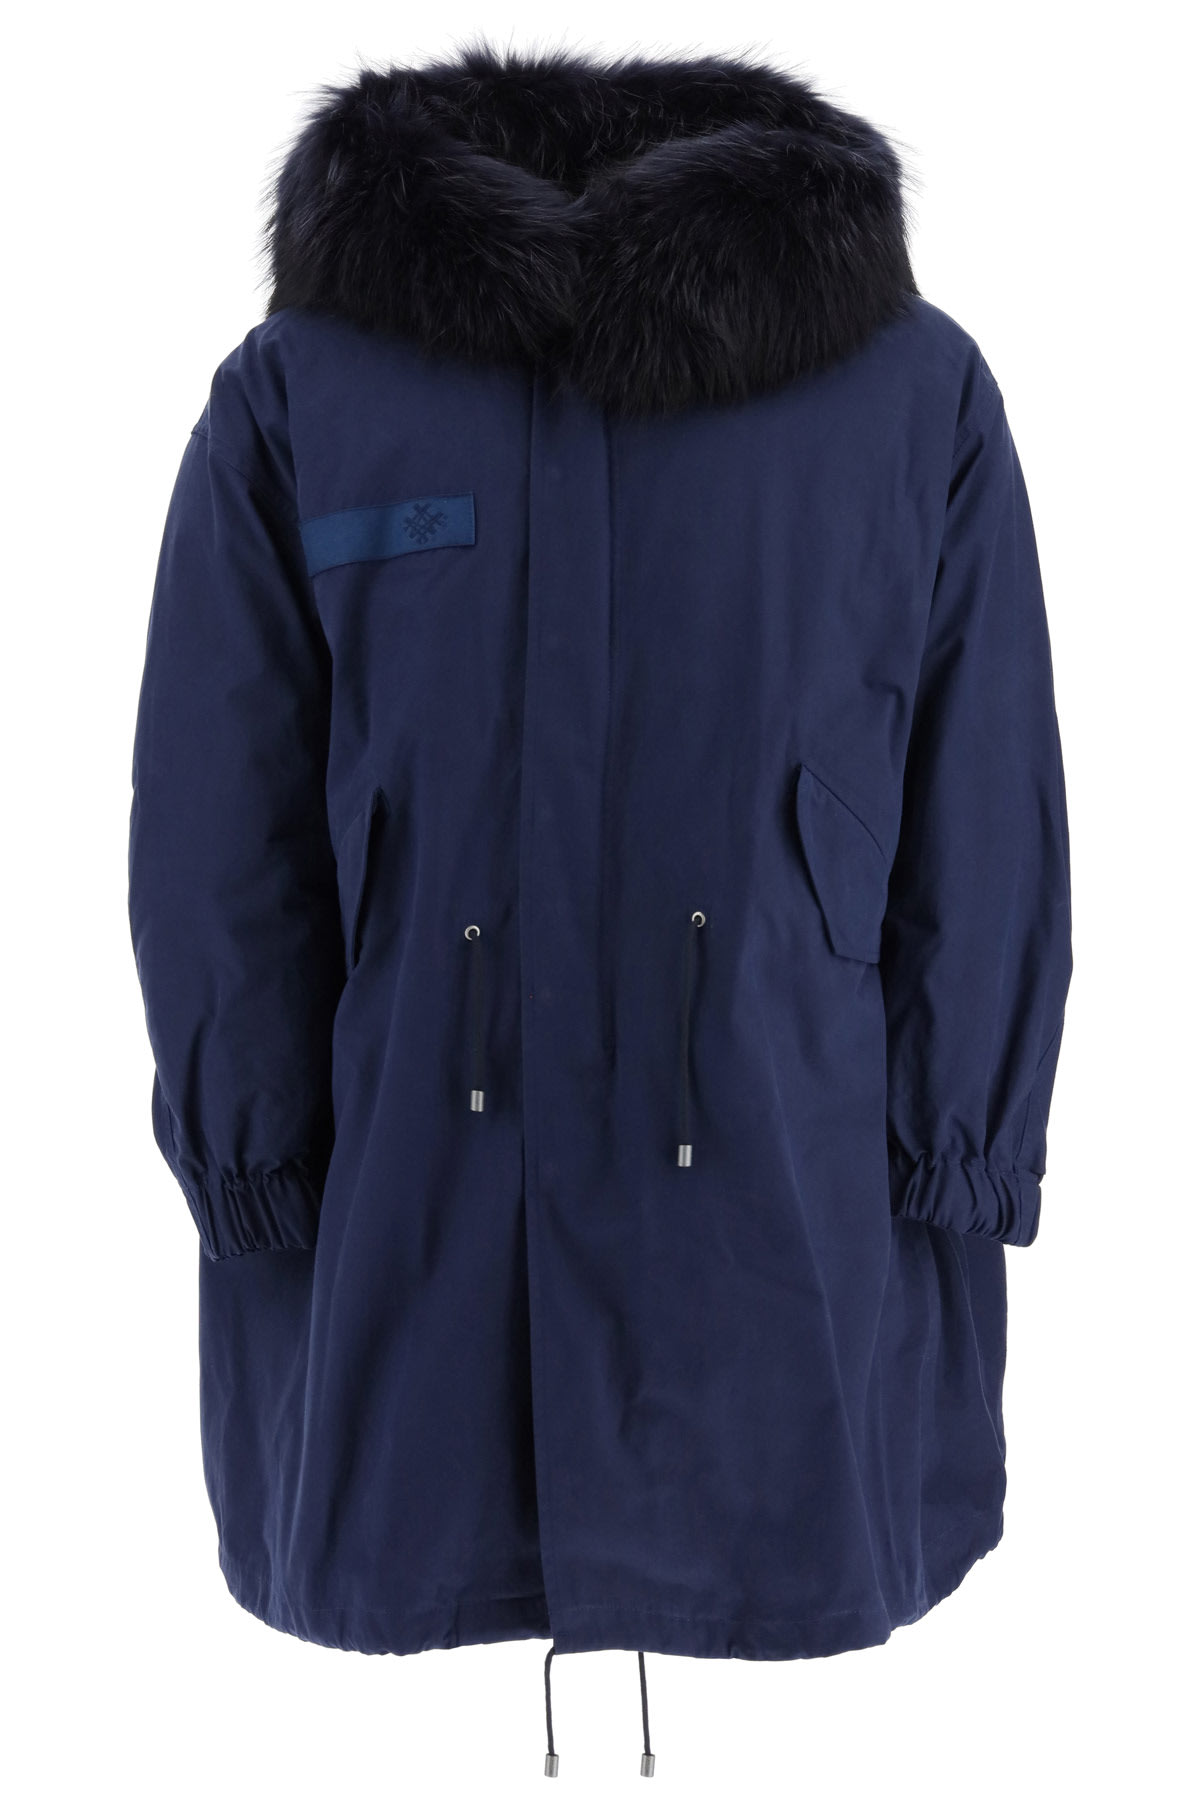 Mr & Mrs Italy M51 Long Parka With Murmasky Fur